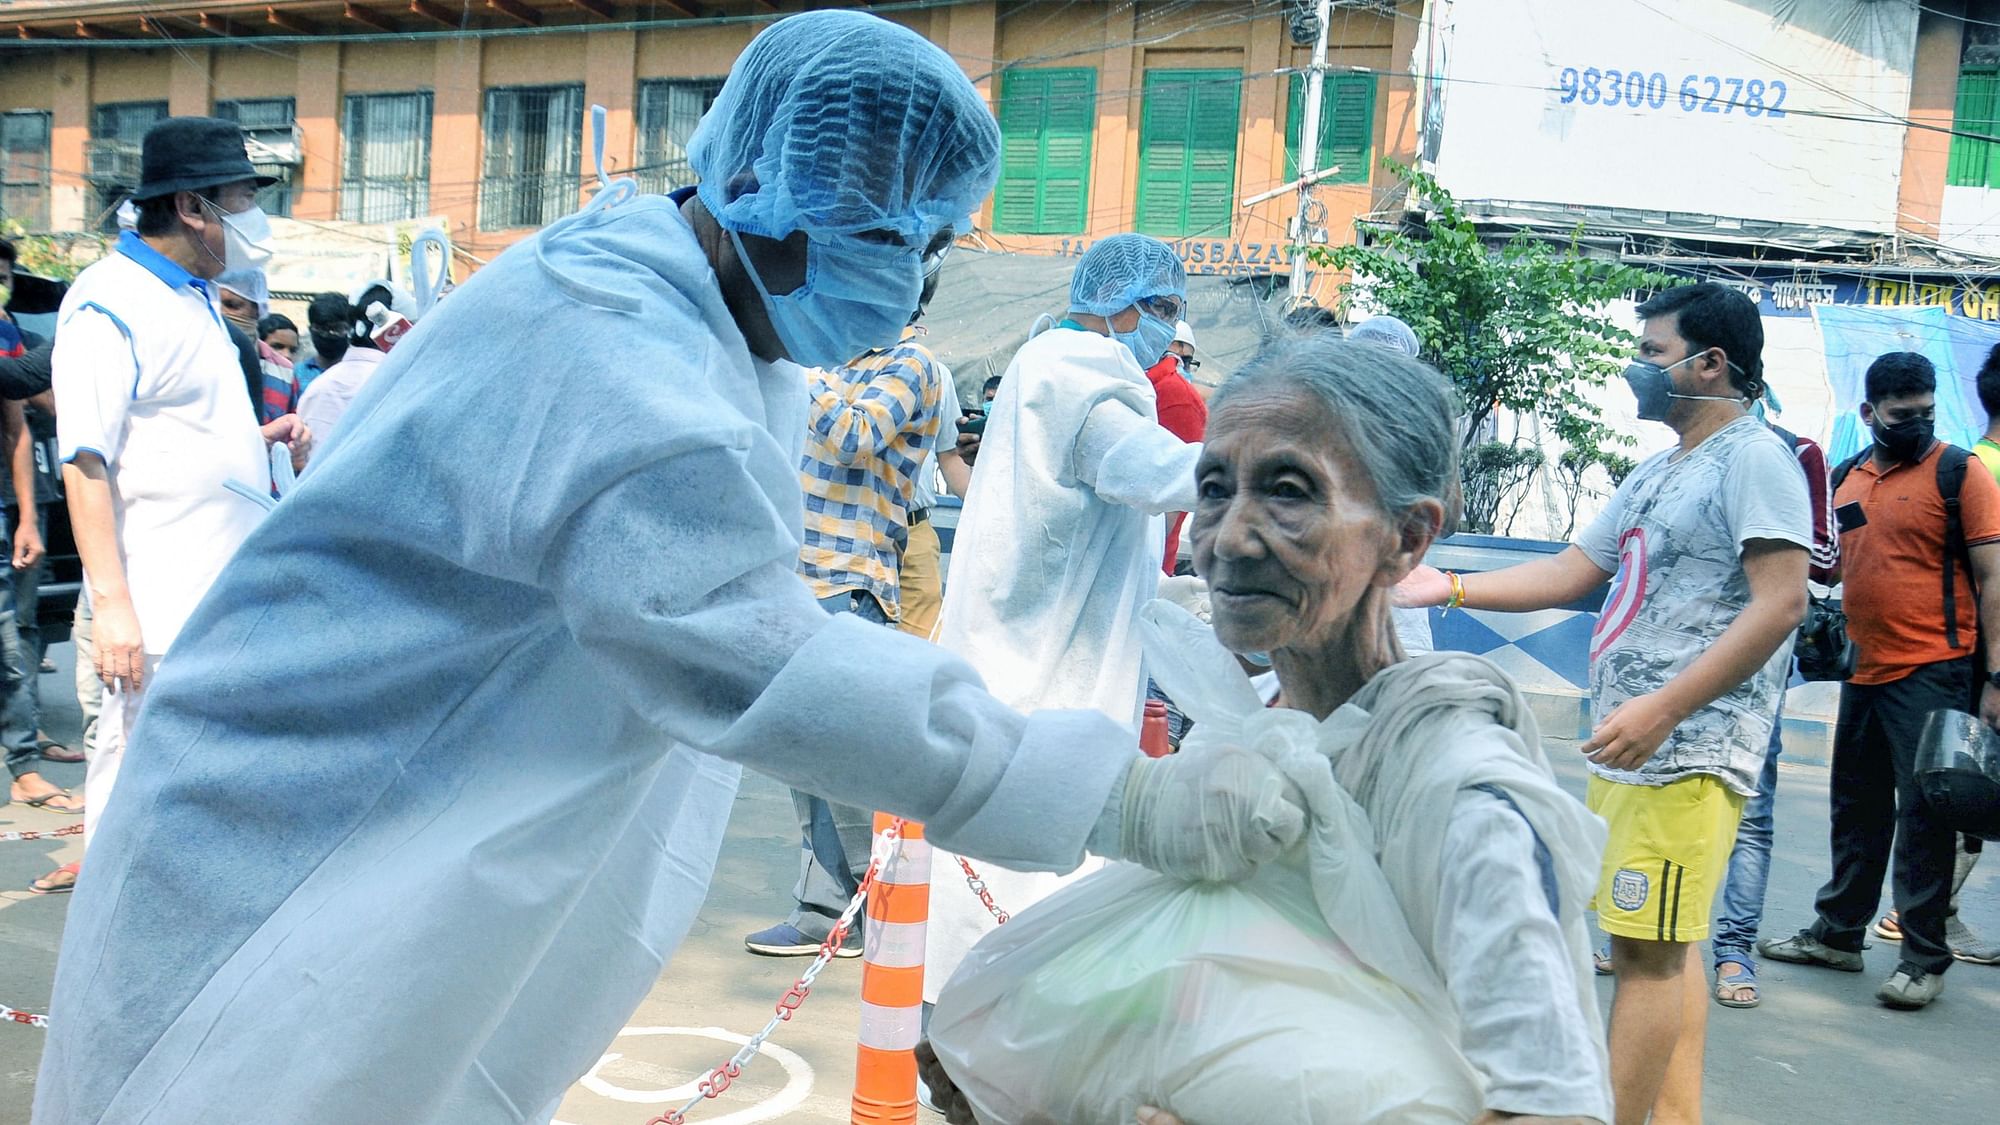 Volunteers wearing protective suits distribute essential items among the needy during the ongoing COVID-19 lockdown, in Kolkata, on Saturday, 4 April.